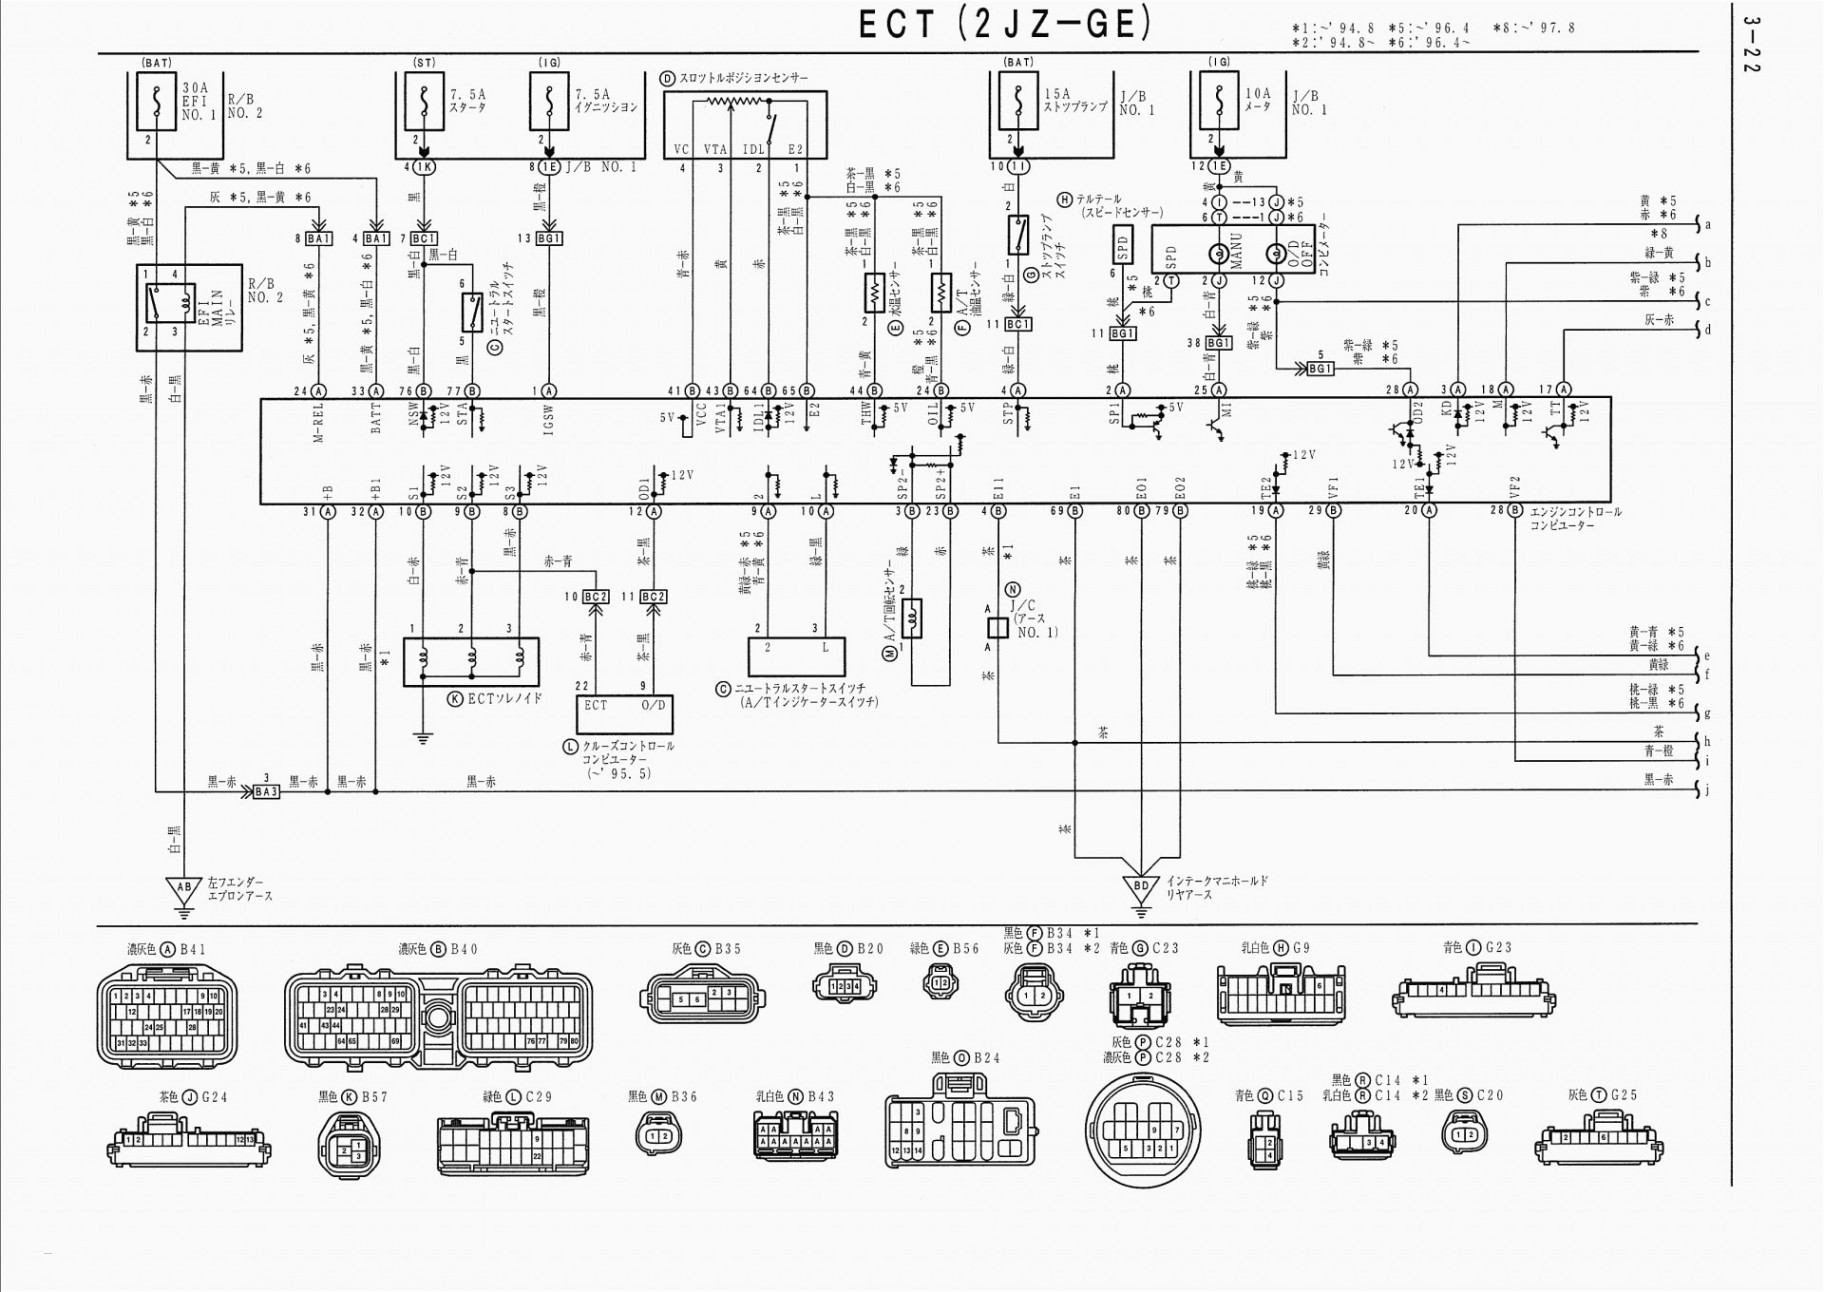 Wiring Diagram with Switch Inspirational Switch Wiring Diagram – Network Switch Diagram Fresh Web Diagram 0d